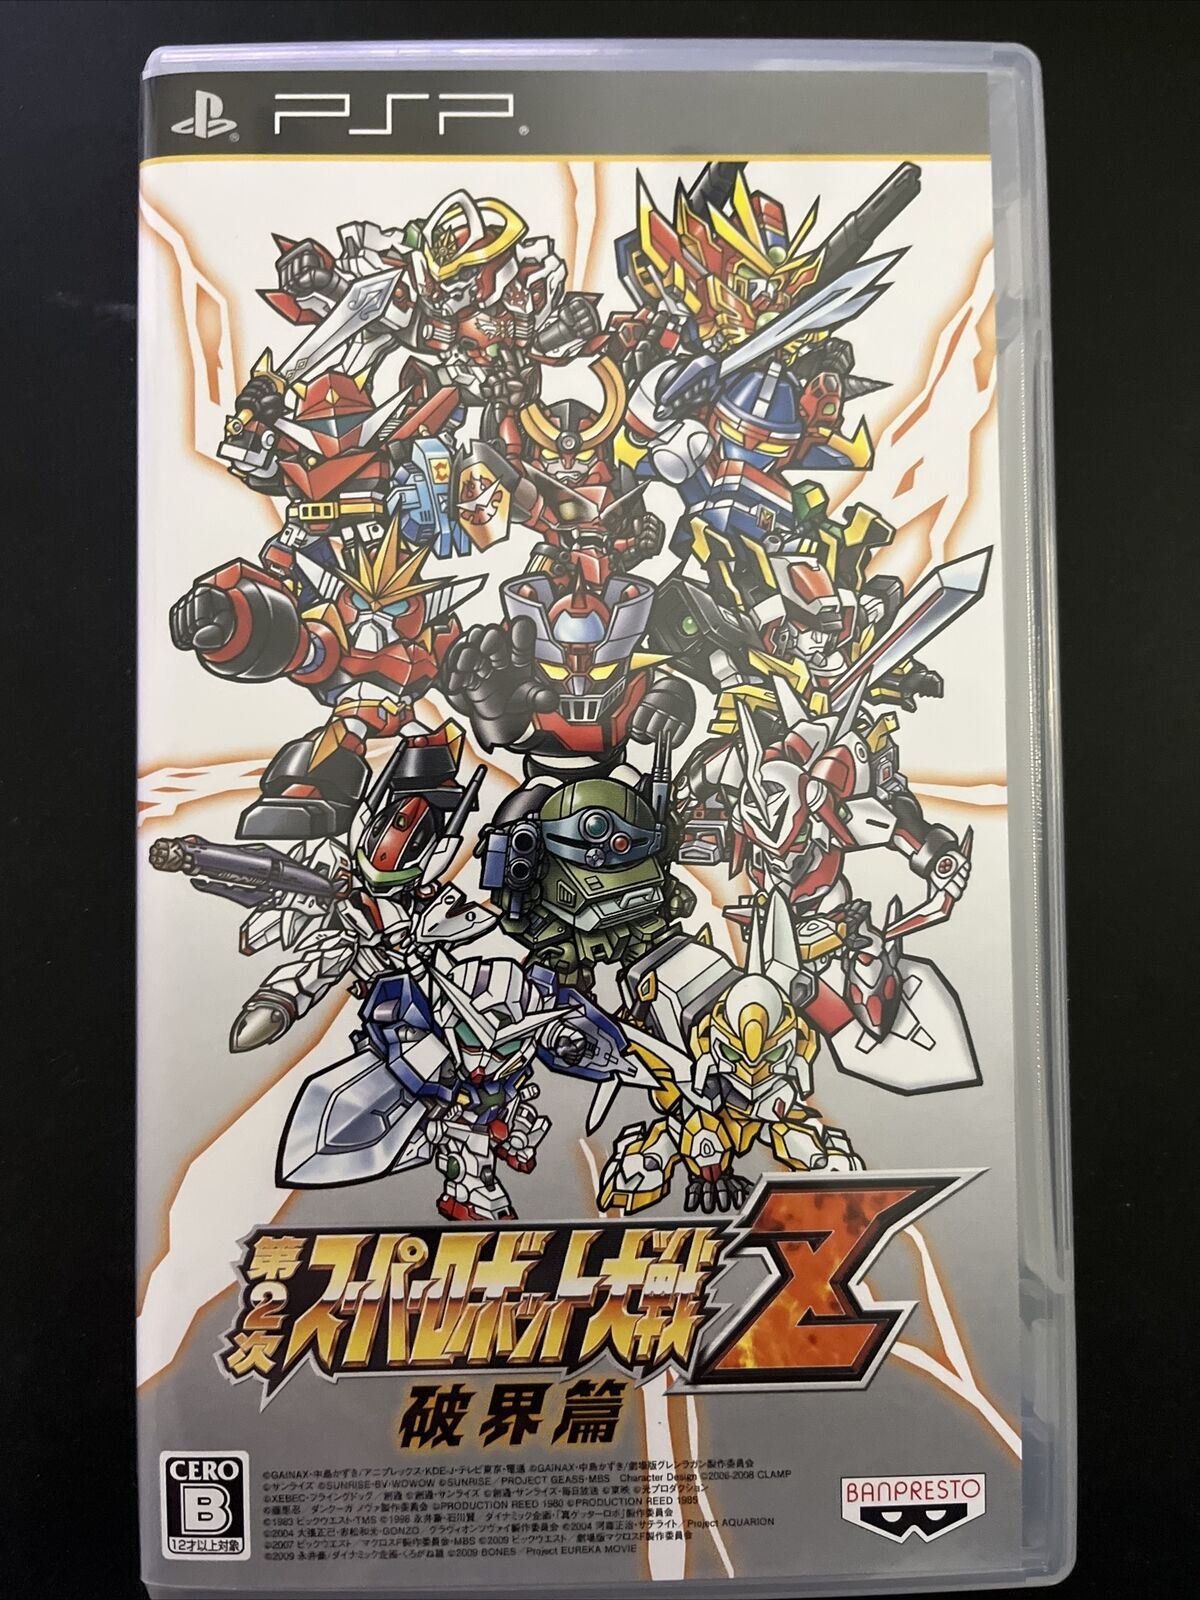 Super Robot Wars Z II Special ZII Box - Sony PSP JAPAN Game Special Edition